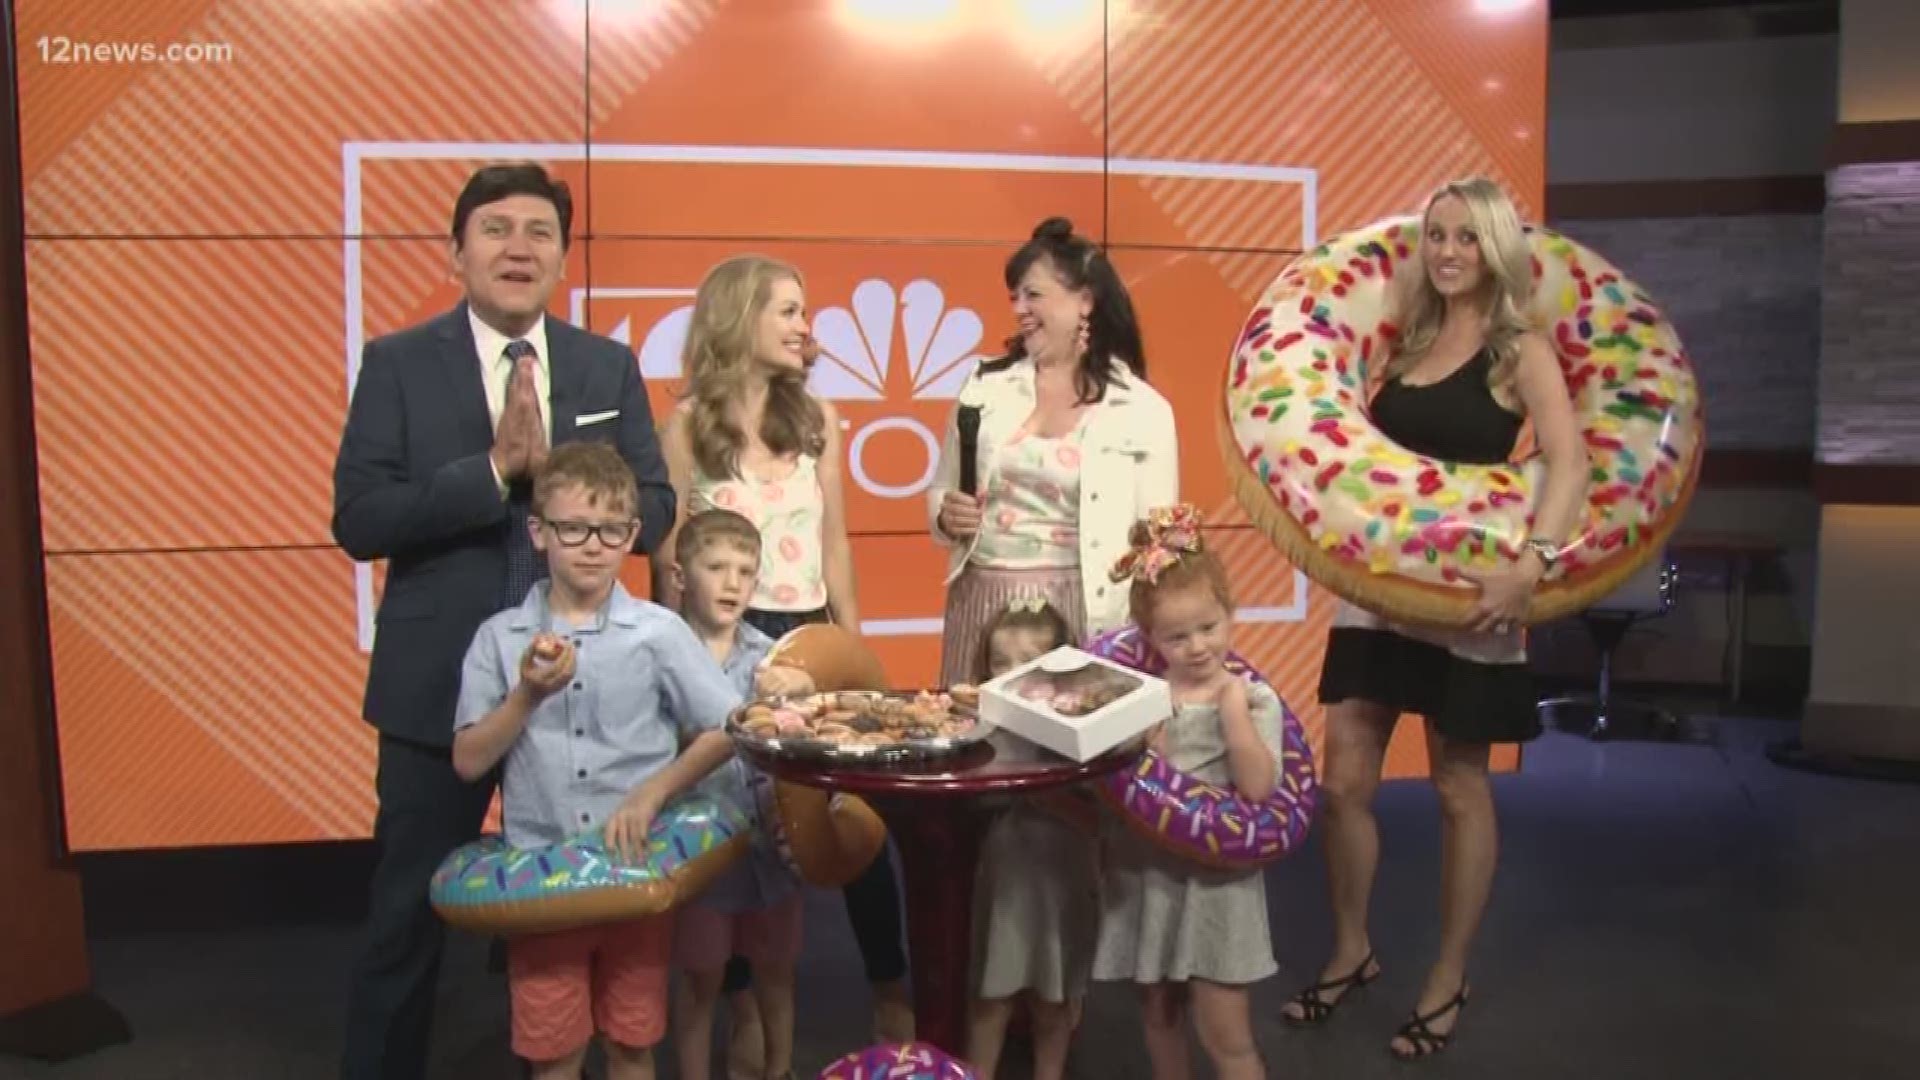 These two moms brought a new spin to Macklemore's "Thrift Shop" to help celebrate National Doughnut Day.